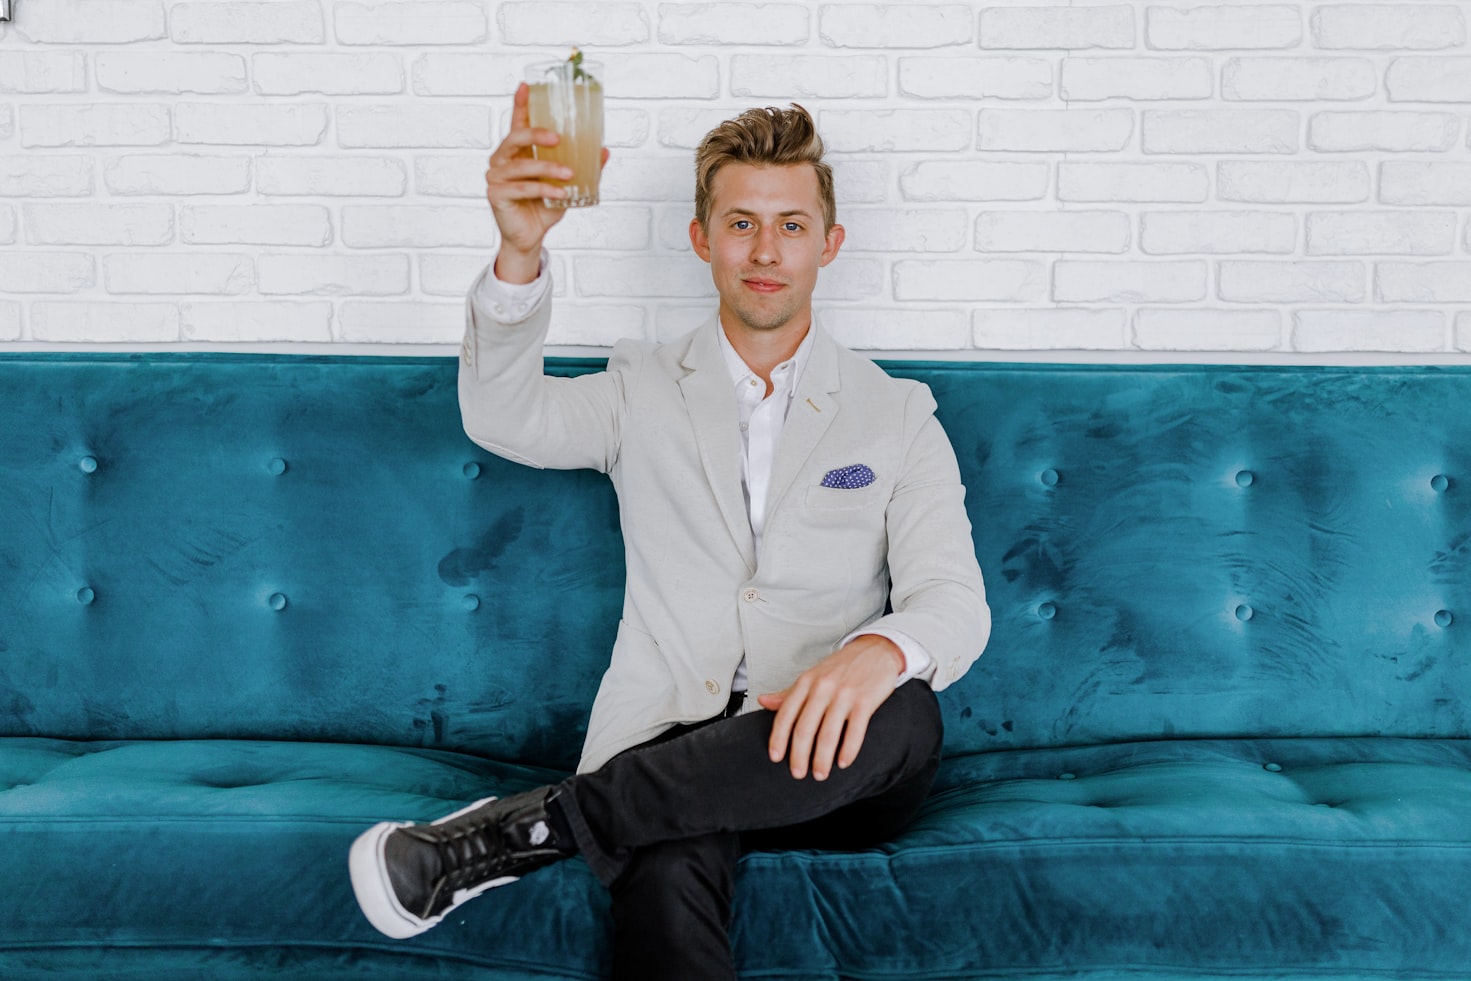 Blonde man sitting on blue couch wearing grey blazer holds up his cocktail while looking at the camera.